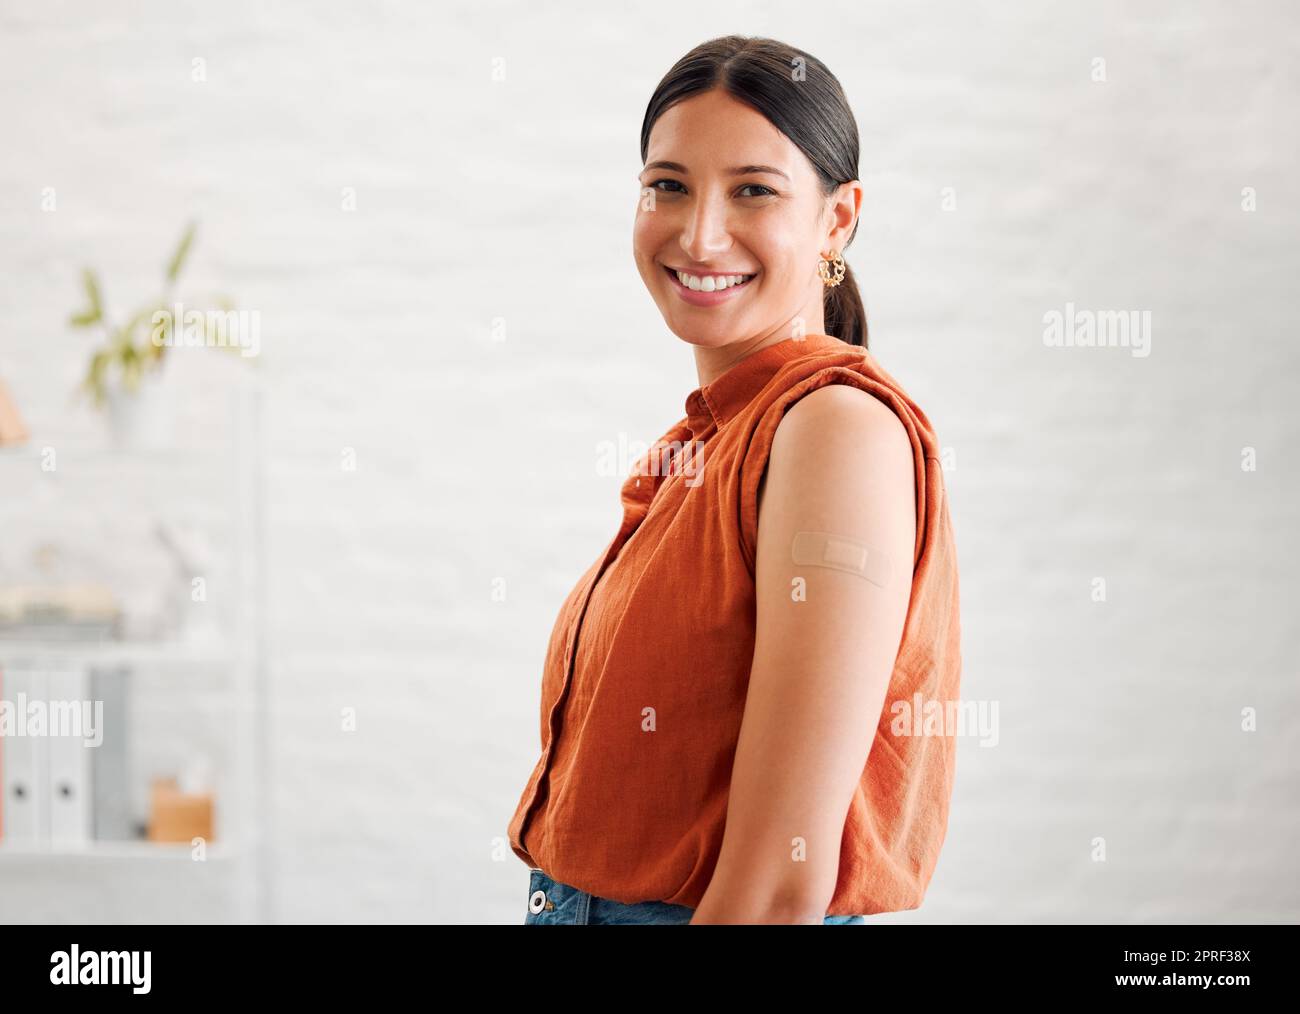 Smiling, happy and motivated female entrepreneur showing great leadership in a creative office with copy space. Portrait of confident and proud entrepreneur satisfied with job in a startup business Stock Photo